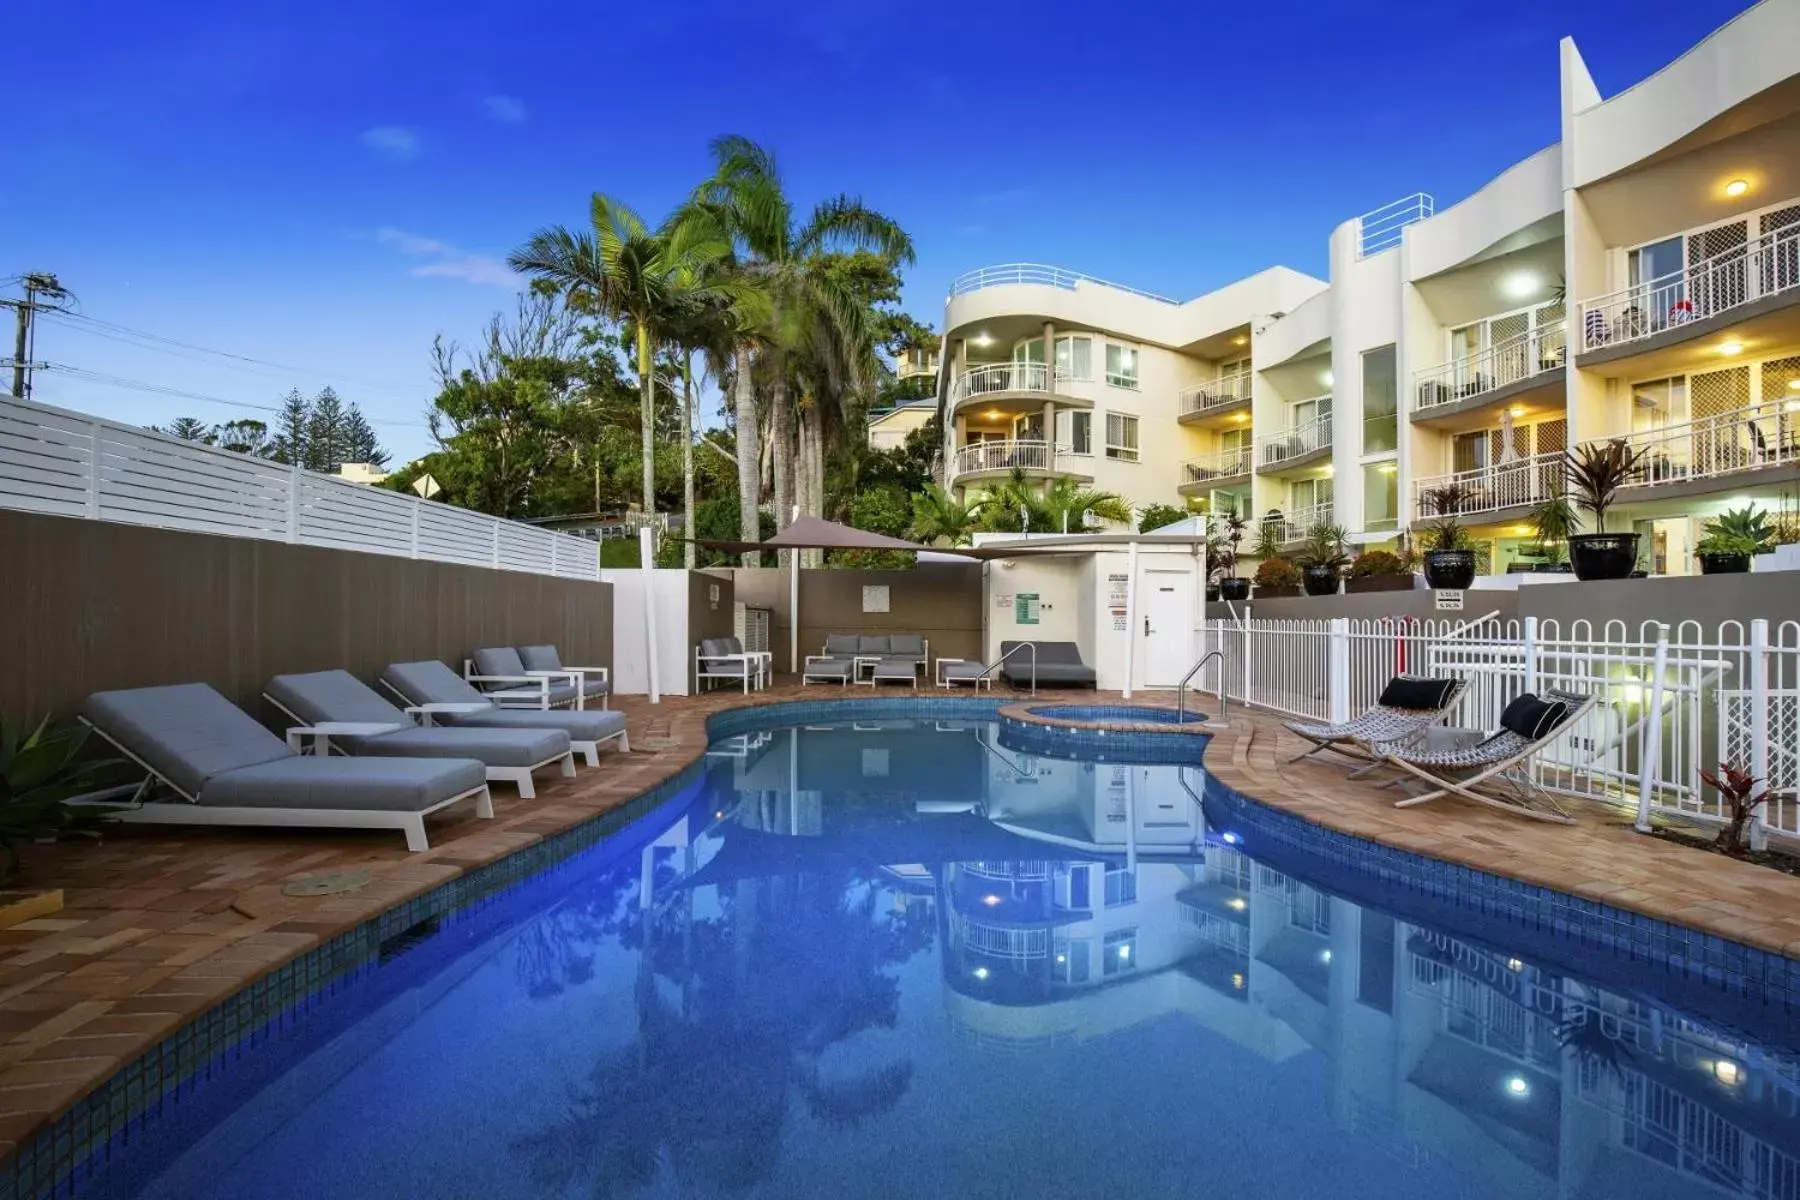 Hot Tub, Property Building in Kirra Palms Holiday Apartments